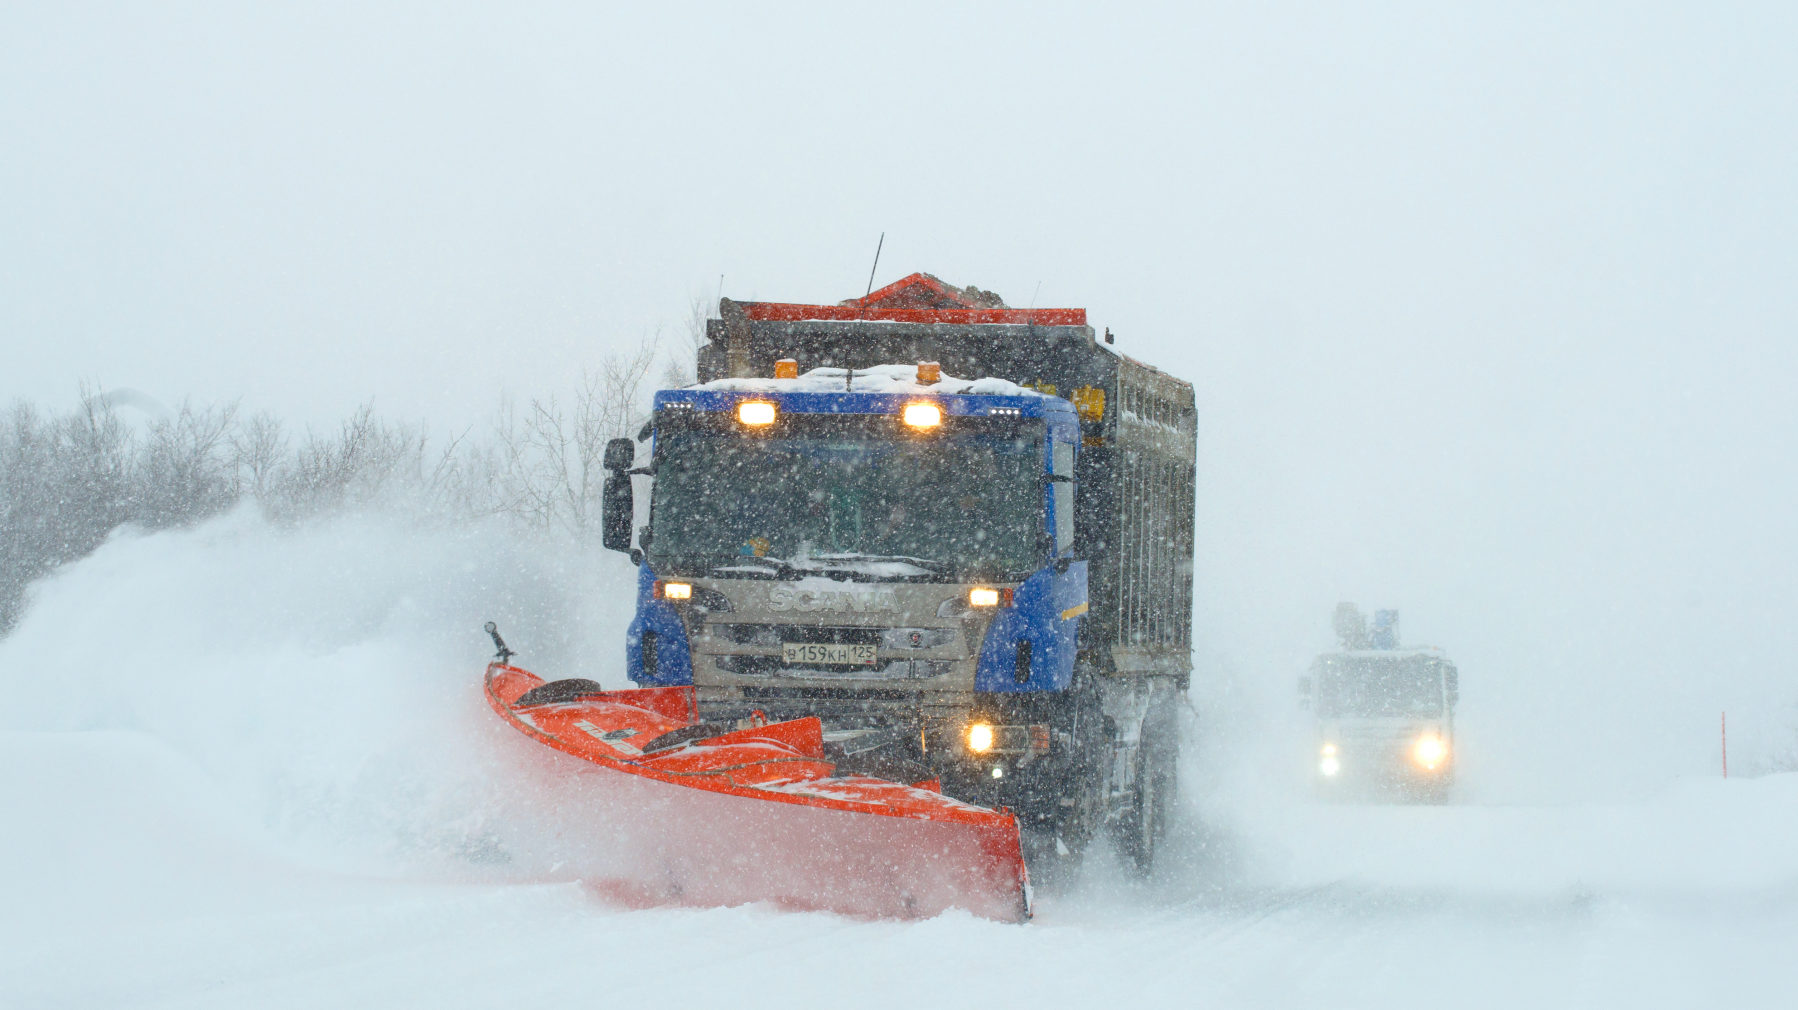 30853762-clearing-the-murmansk-teriberka-road-during-a-snow-storm